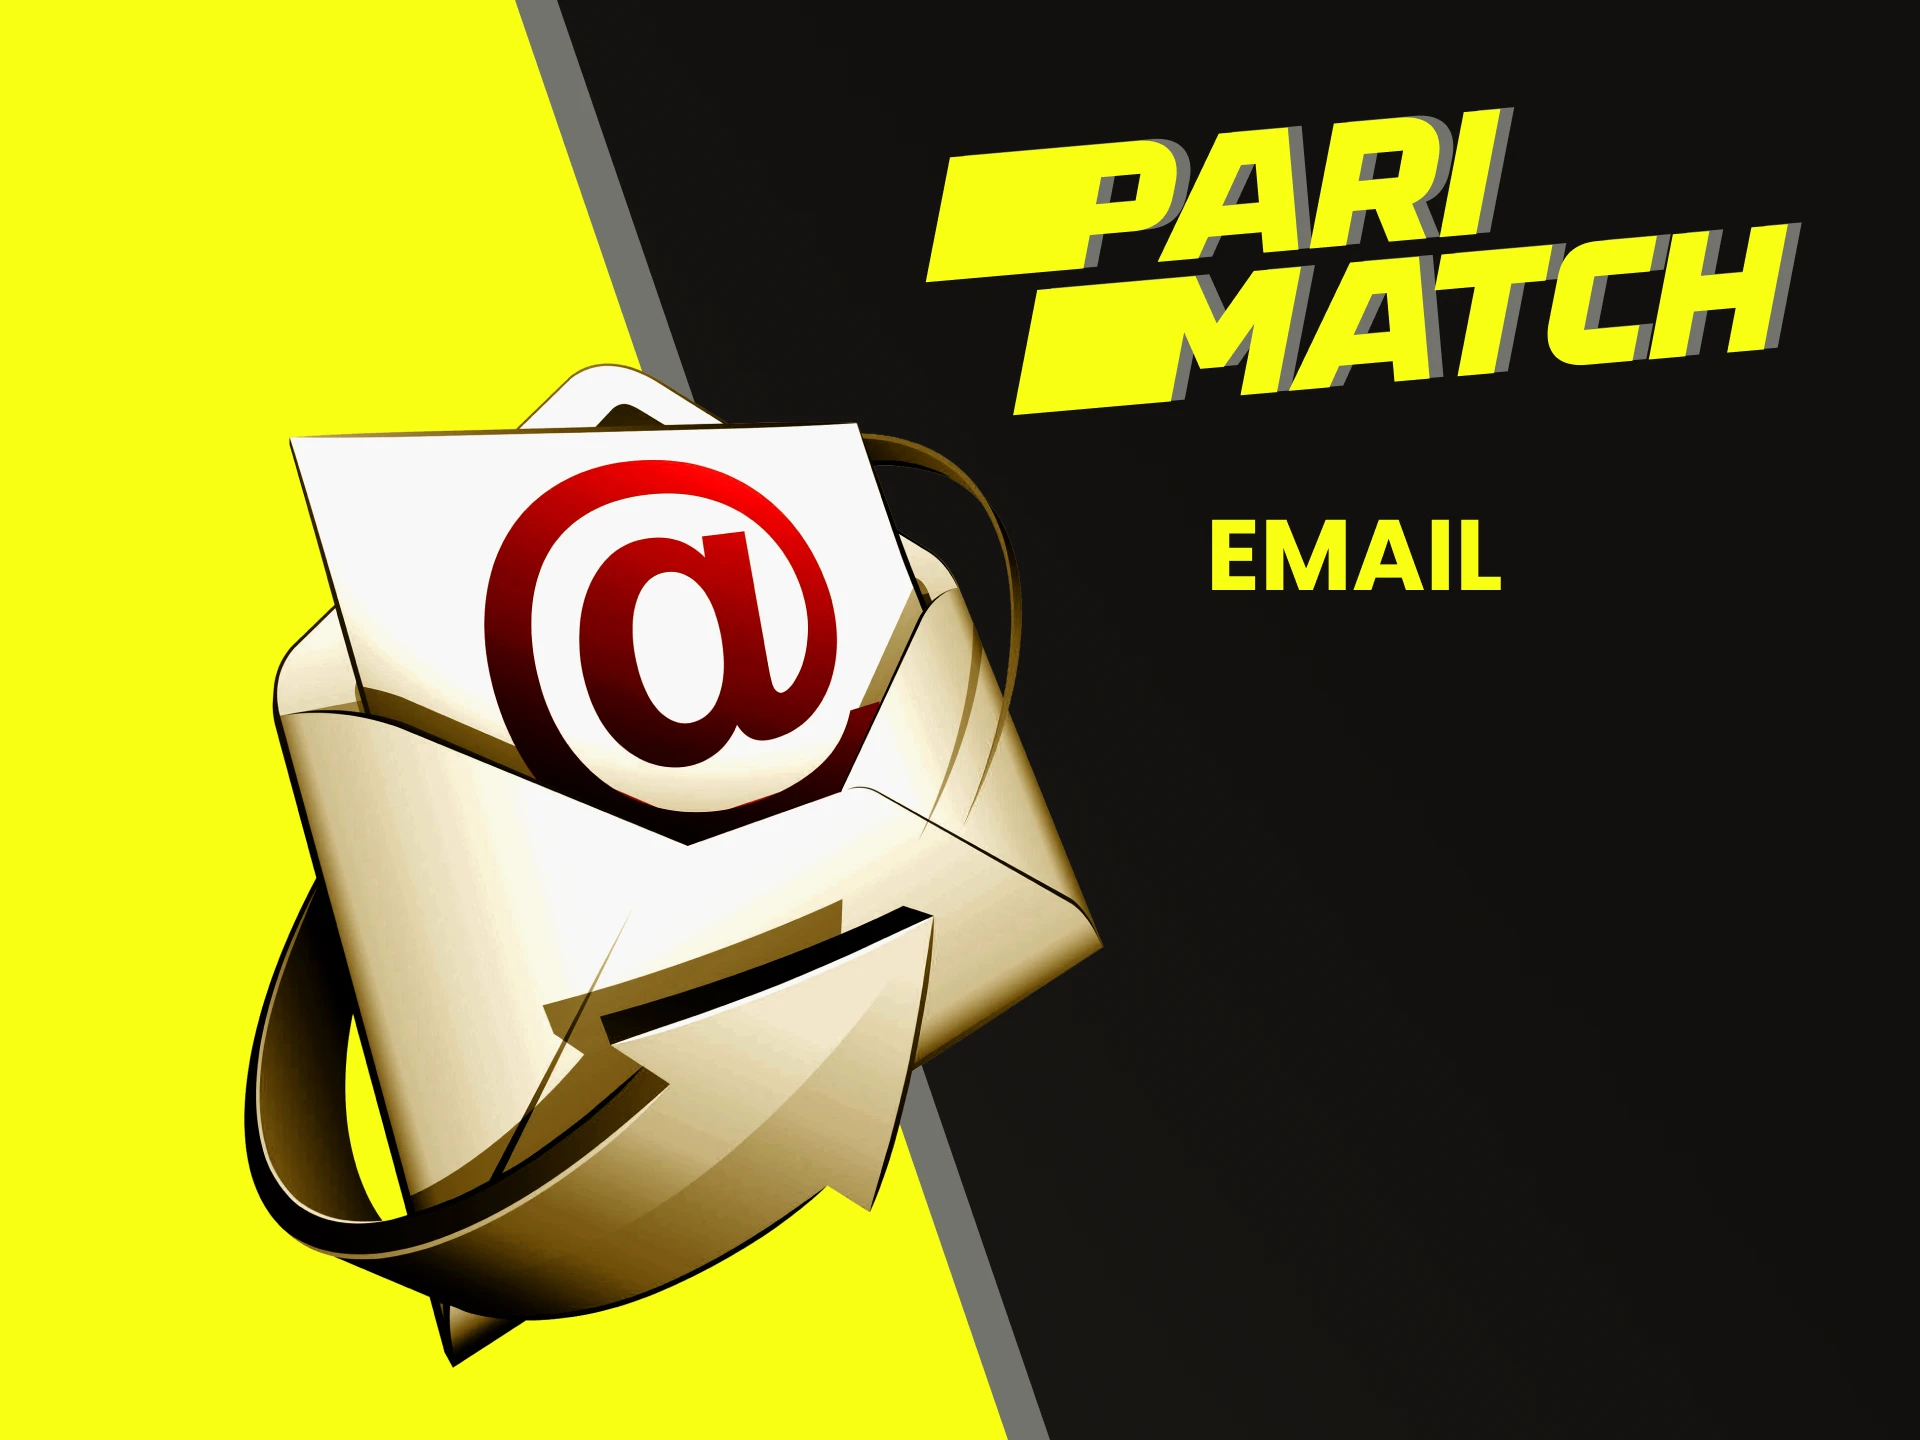 You can contact the Parimacth team via email.